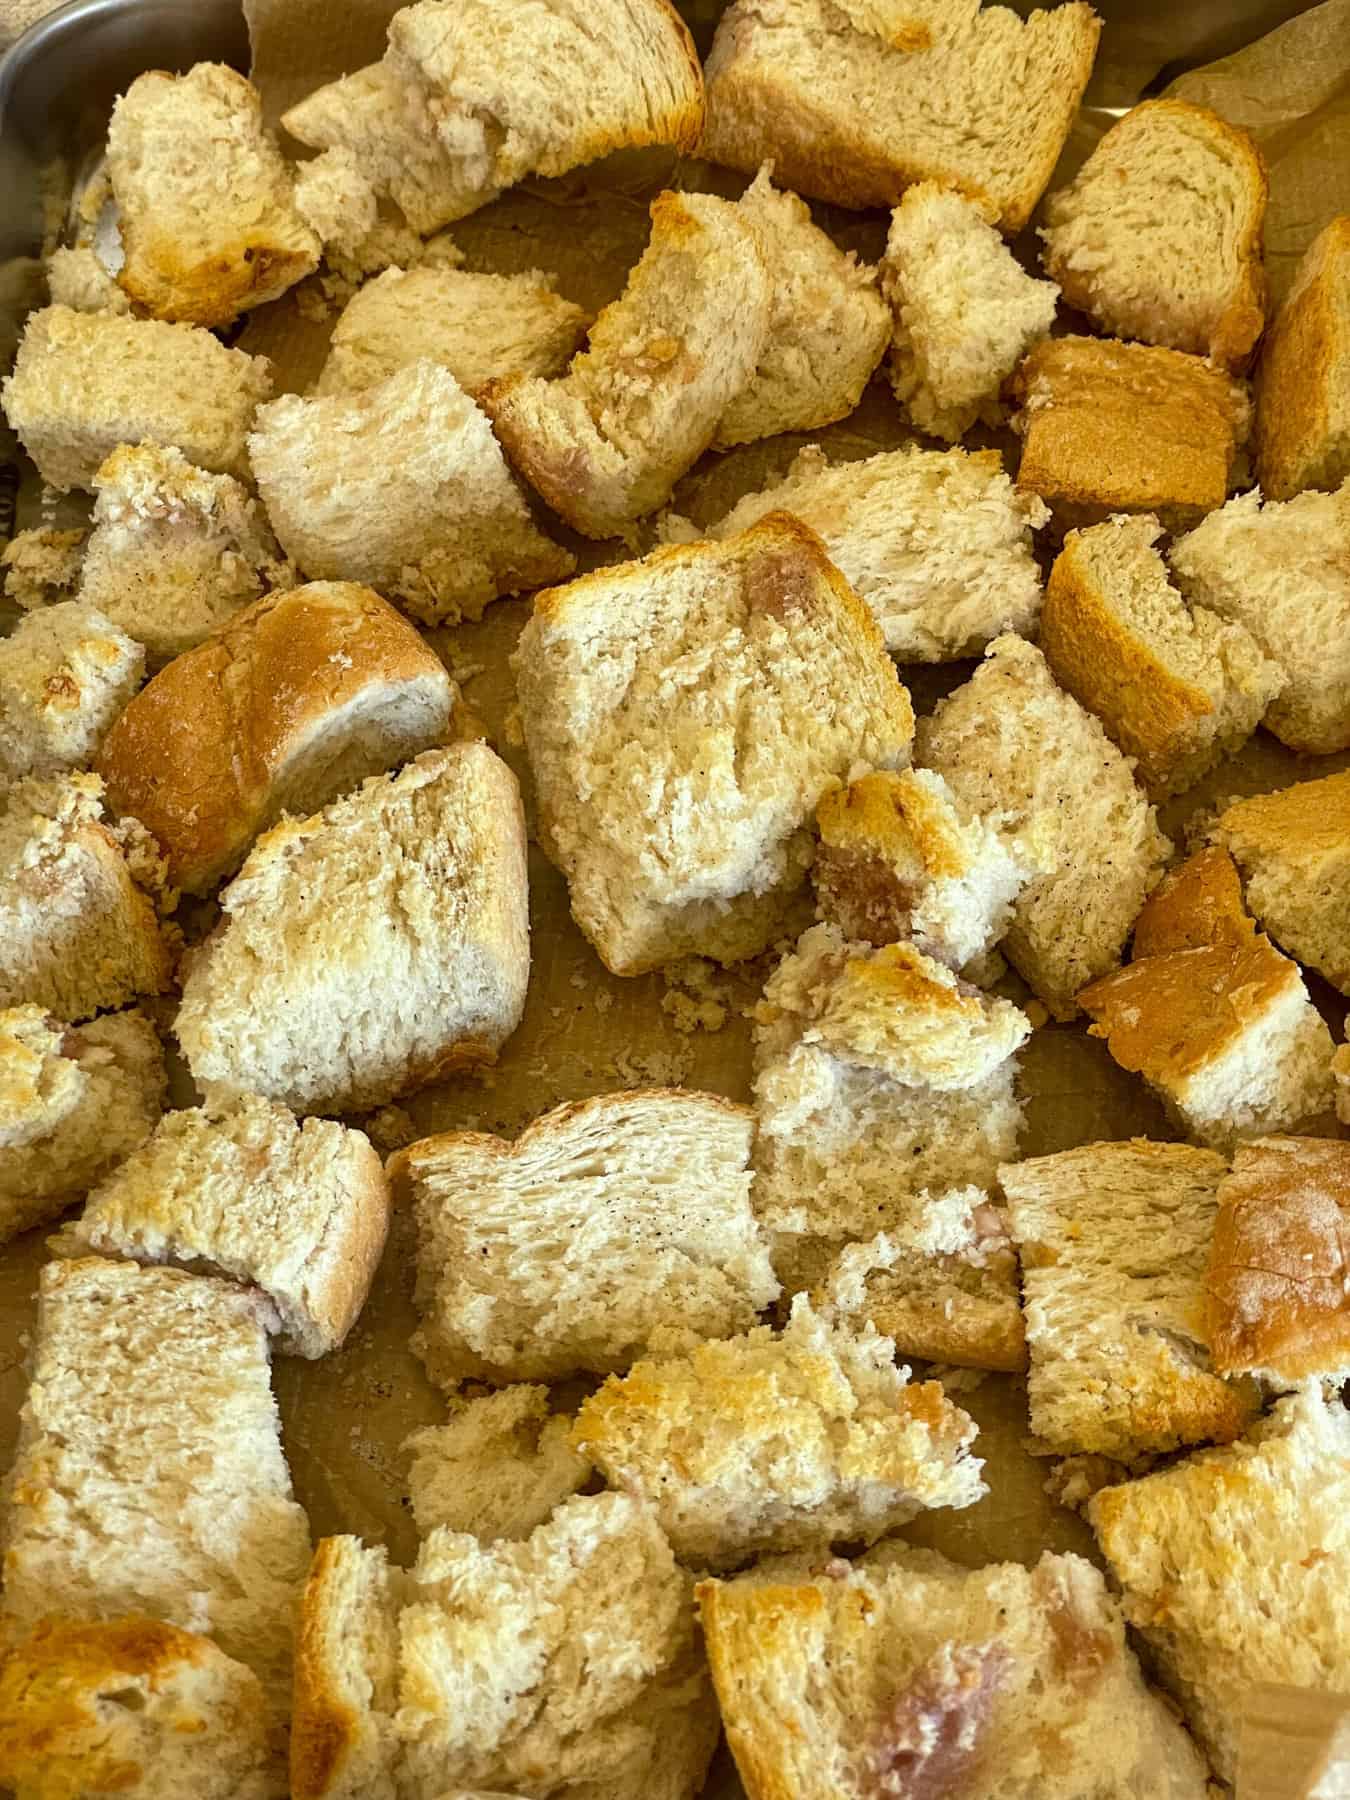 Bread cubes toasted and ready on a baking tray.